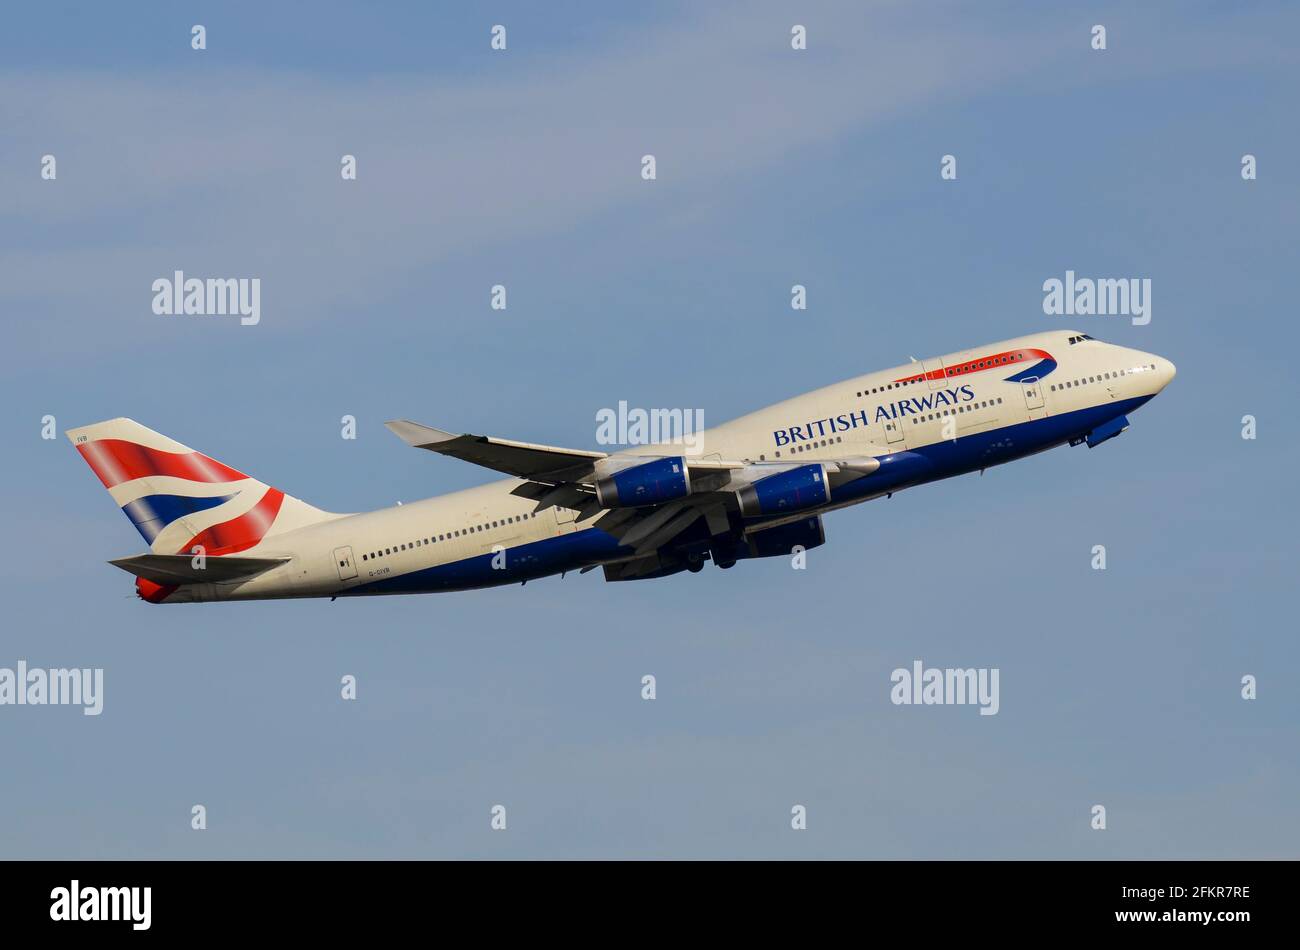 British Airways Boeing 747 jumbo jet airliner plane G-CIVB taking off from London Heathrow Airport, UK. Climbing out for a long haul international Stock Photo